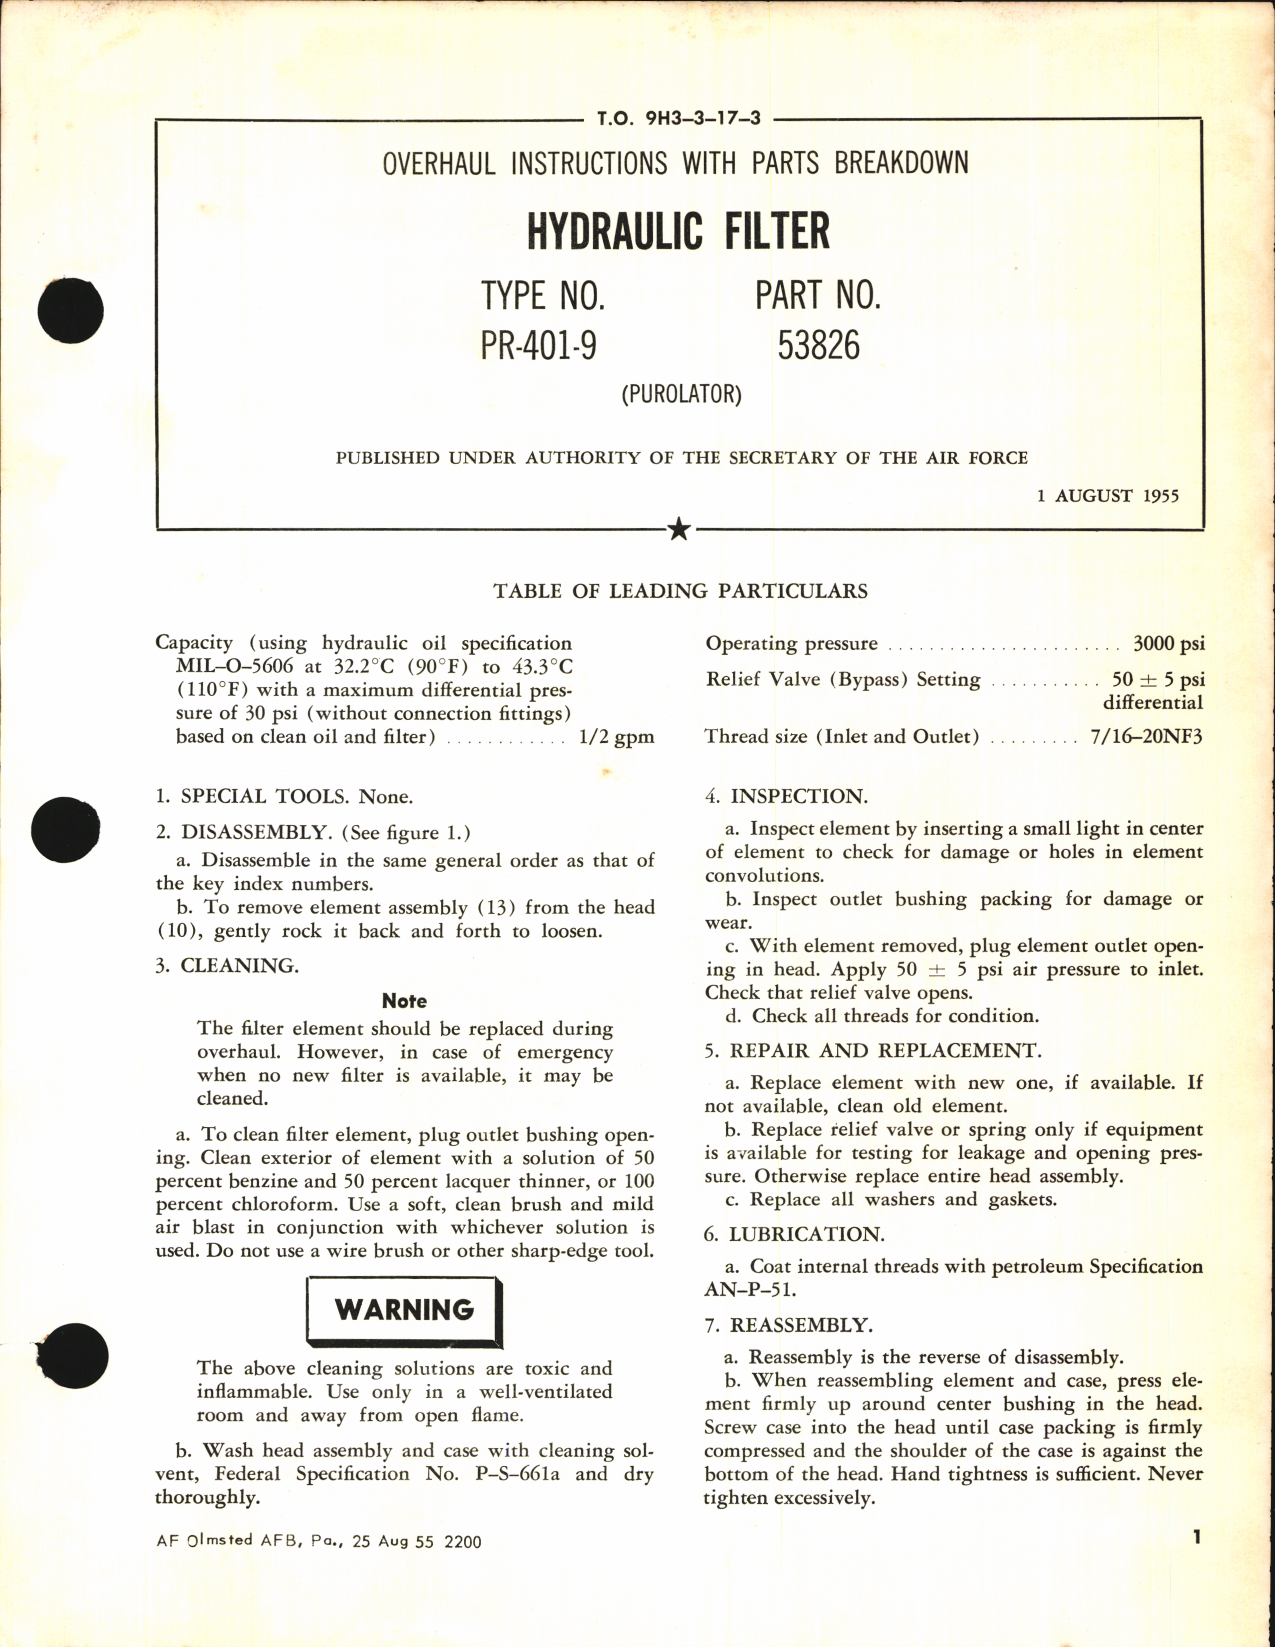 Sample page 1 from AirCorps Library document: Overhaul Instructions with Parts Breakdown for Hydraulic Filters Type No. PR-401-9, Part No. 53826